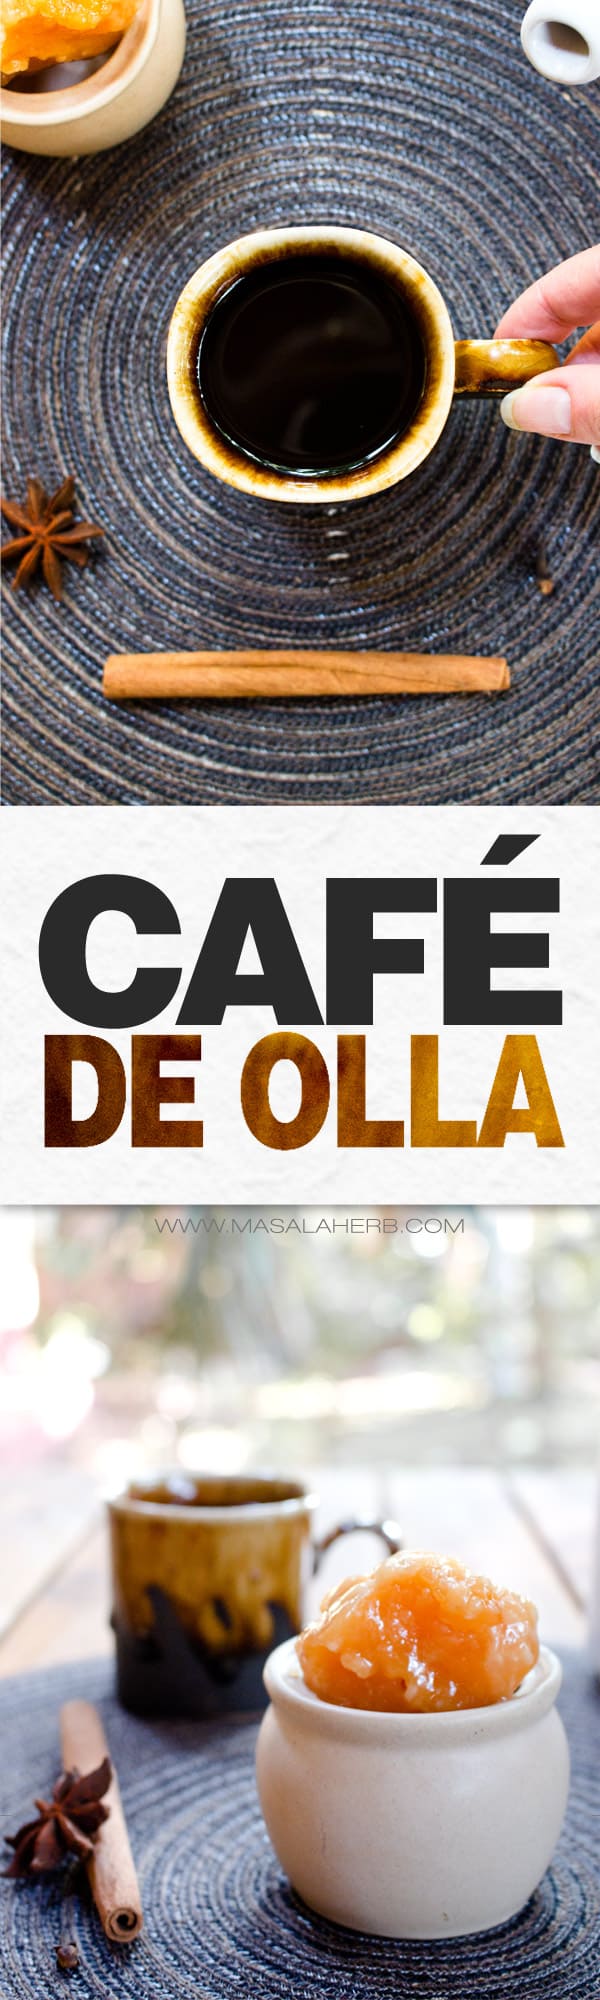 Cafe de Olla - How to make Spiced Mexican Coffee [+Video] prepared with common sweet spices and cane sugar aka mexican Piloncillo. de olla means lit. translated clay "earthenware"pot. Café de Olla is prepared when it's cold and warms up the cold body from within. www.MasalaHerb.com #masalaherb #coffee #spiced #mexican